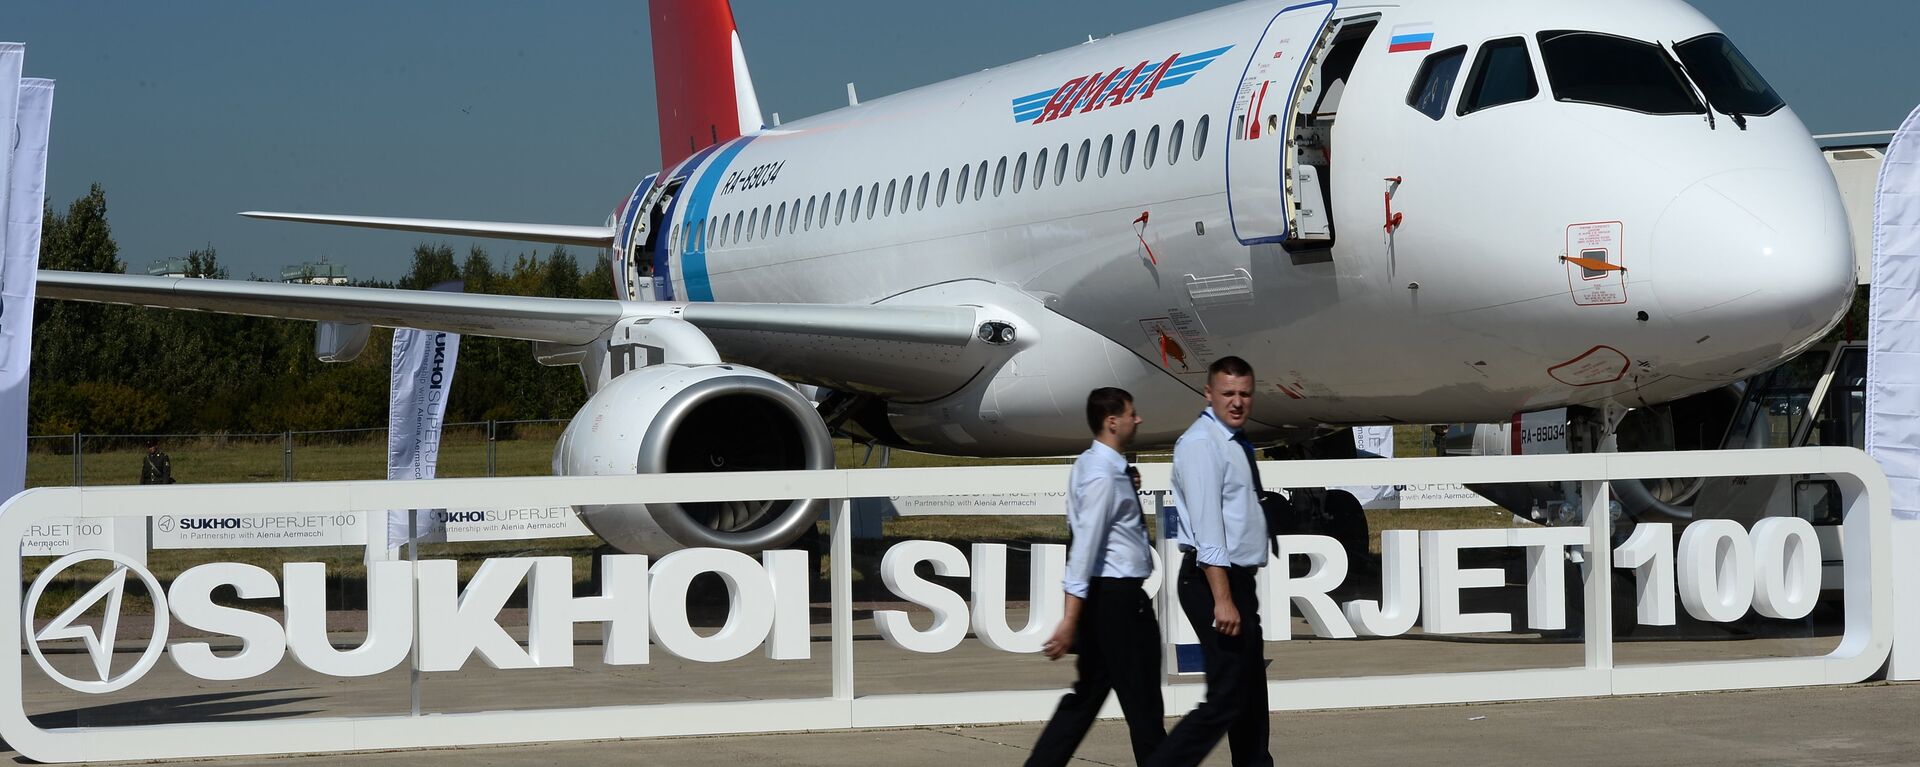 The Sukhoi Superjet 100, presented at the 2015 MAKS air show's opening ceremony in Zhukovsky, outside Moscow. - Sputnik International, 1920, 31.08.2023